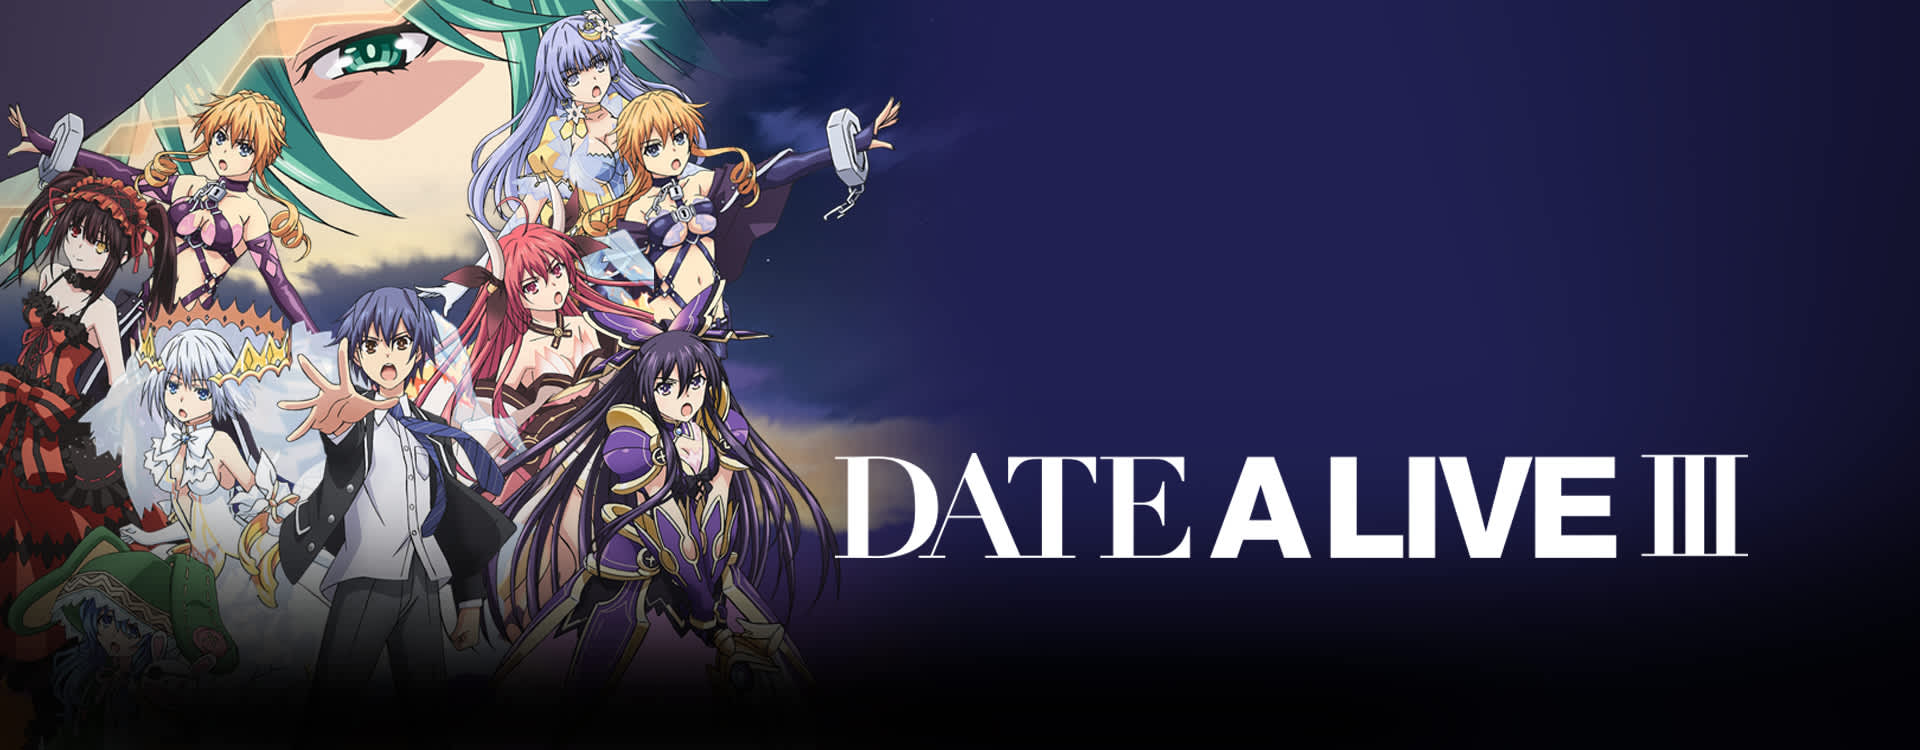 English Dub Review - Date A Live 3 Cover , HD Wallpaper & Backgrounds